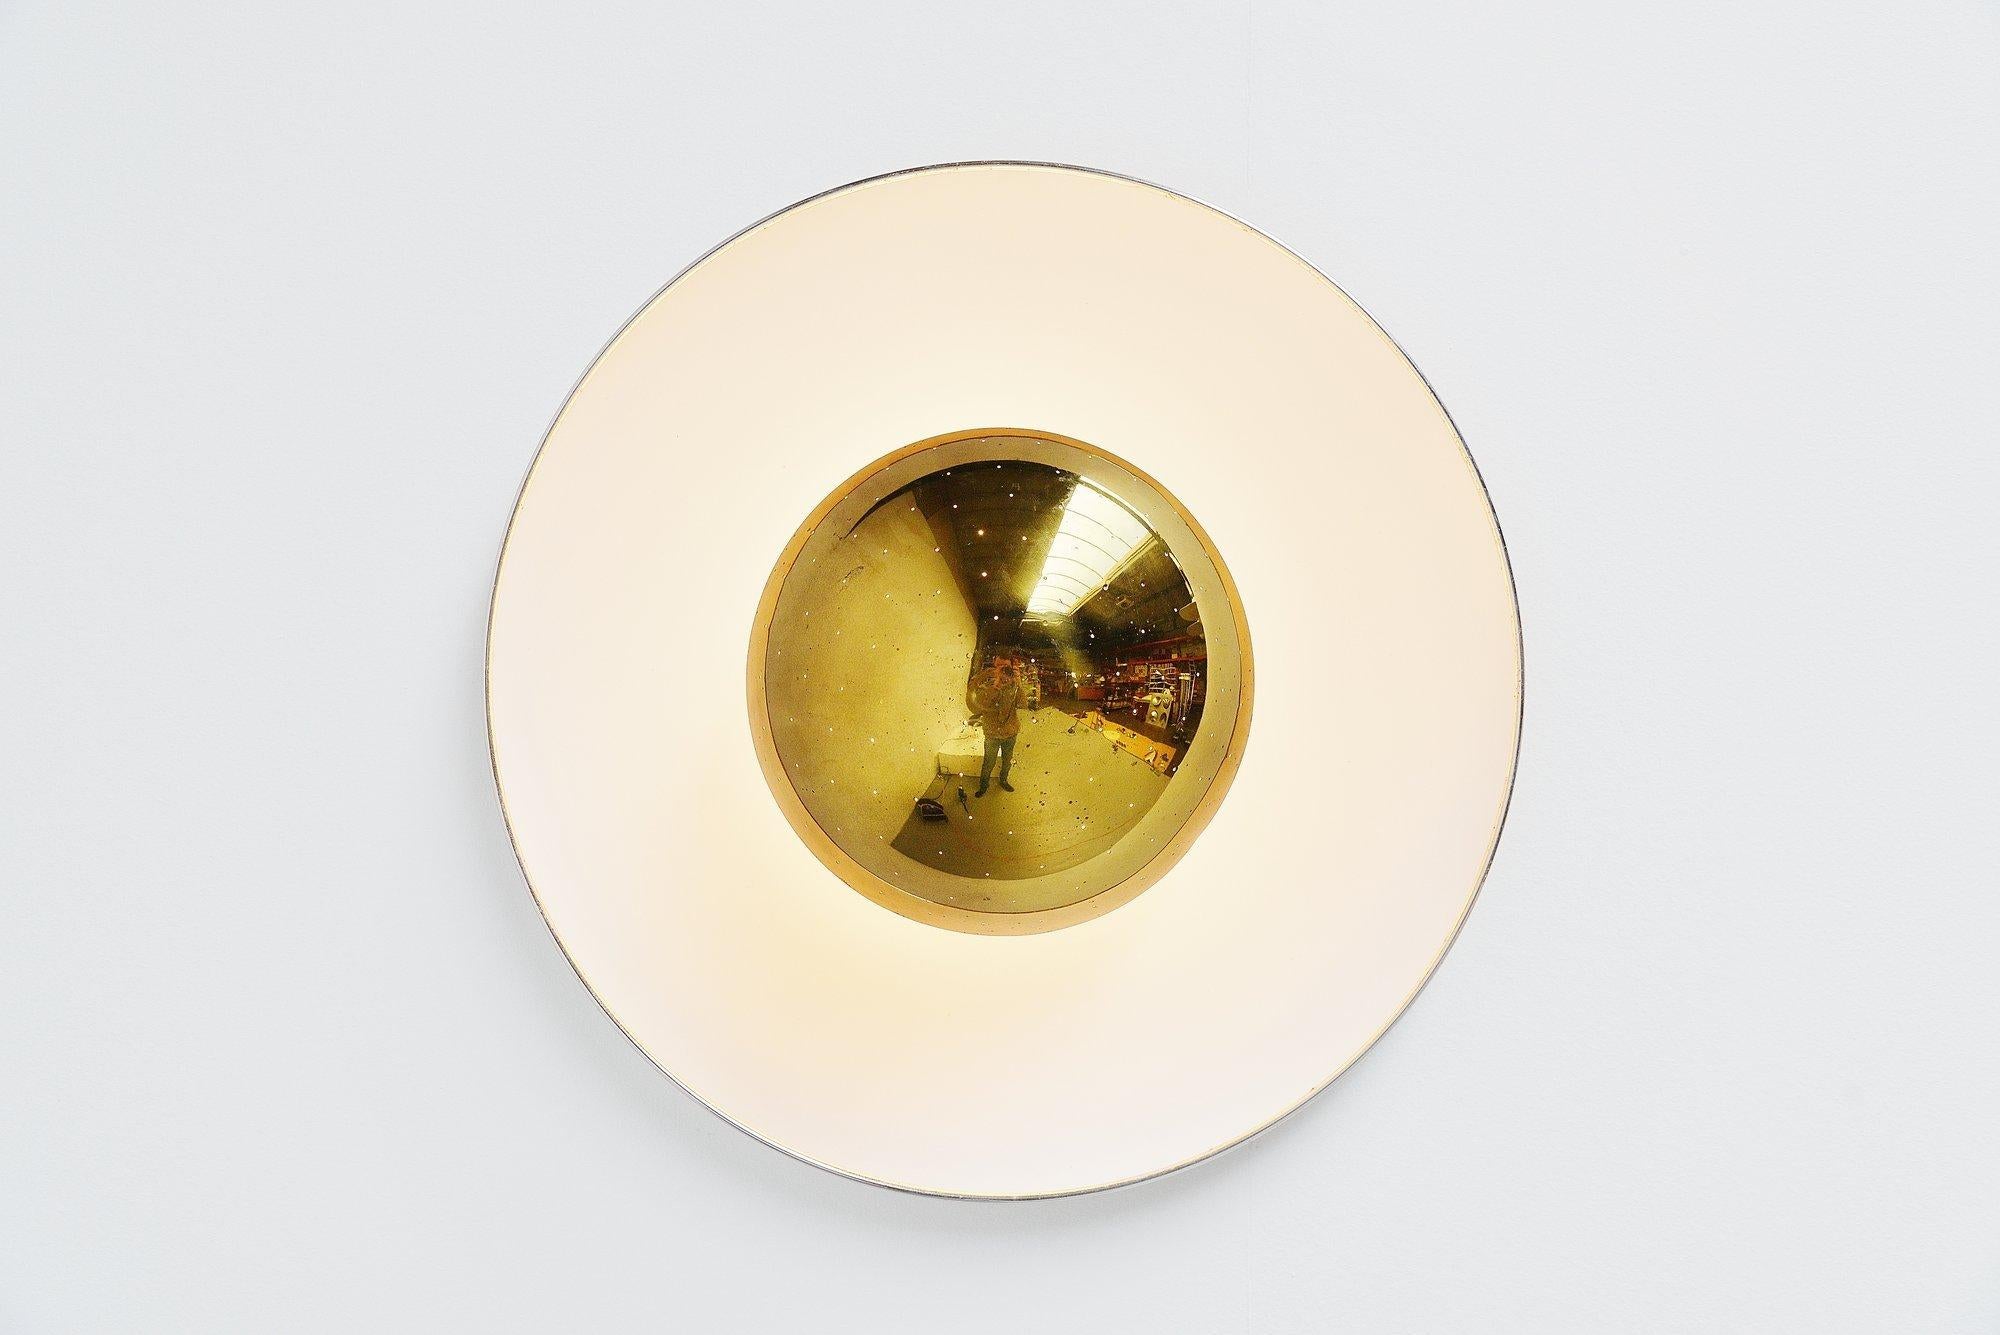 Rare ceiling lamp designed by Gino Sarfatti for Arteluce, Milano, 1950. This very nice dish shaped ceiling lamp is Mod. No. 155 and was made of white lacquered aluminium and brass edge and diffuser shade. This lamp gives fantastic light when lit and